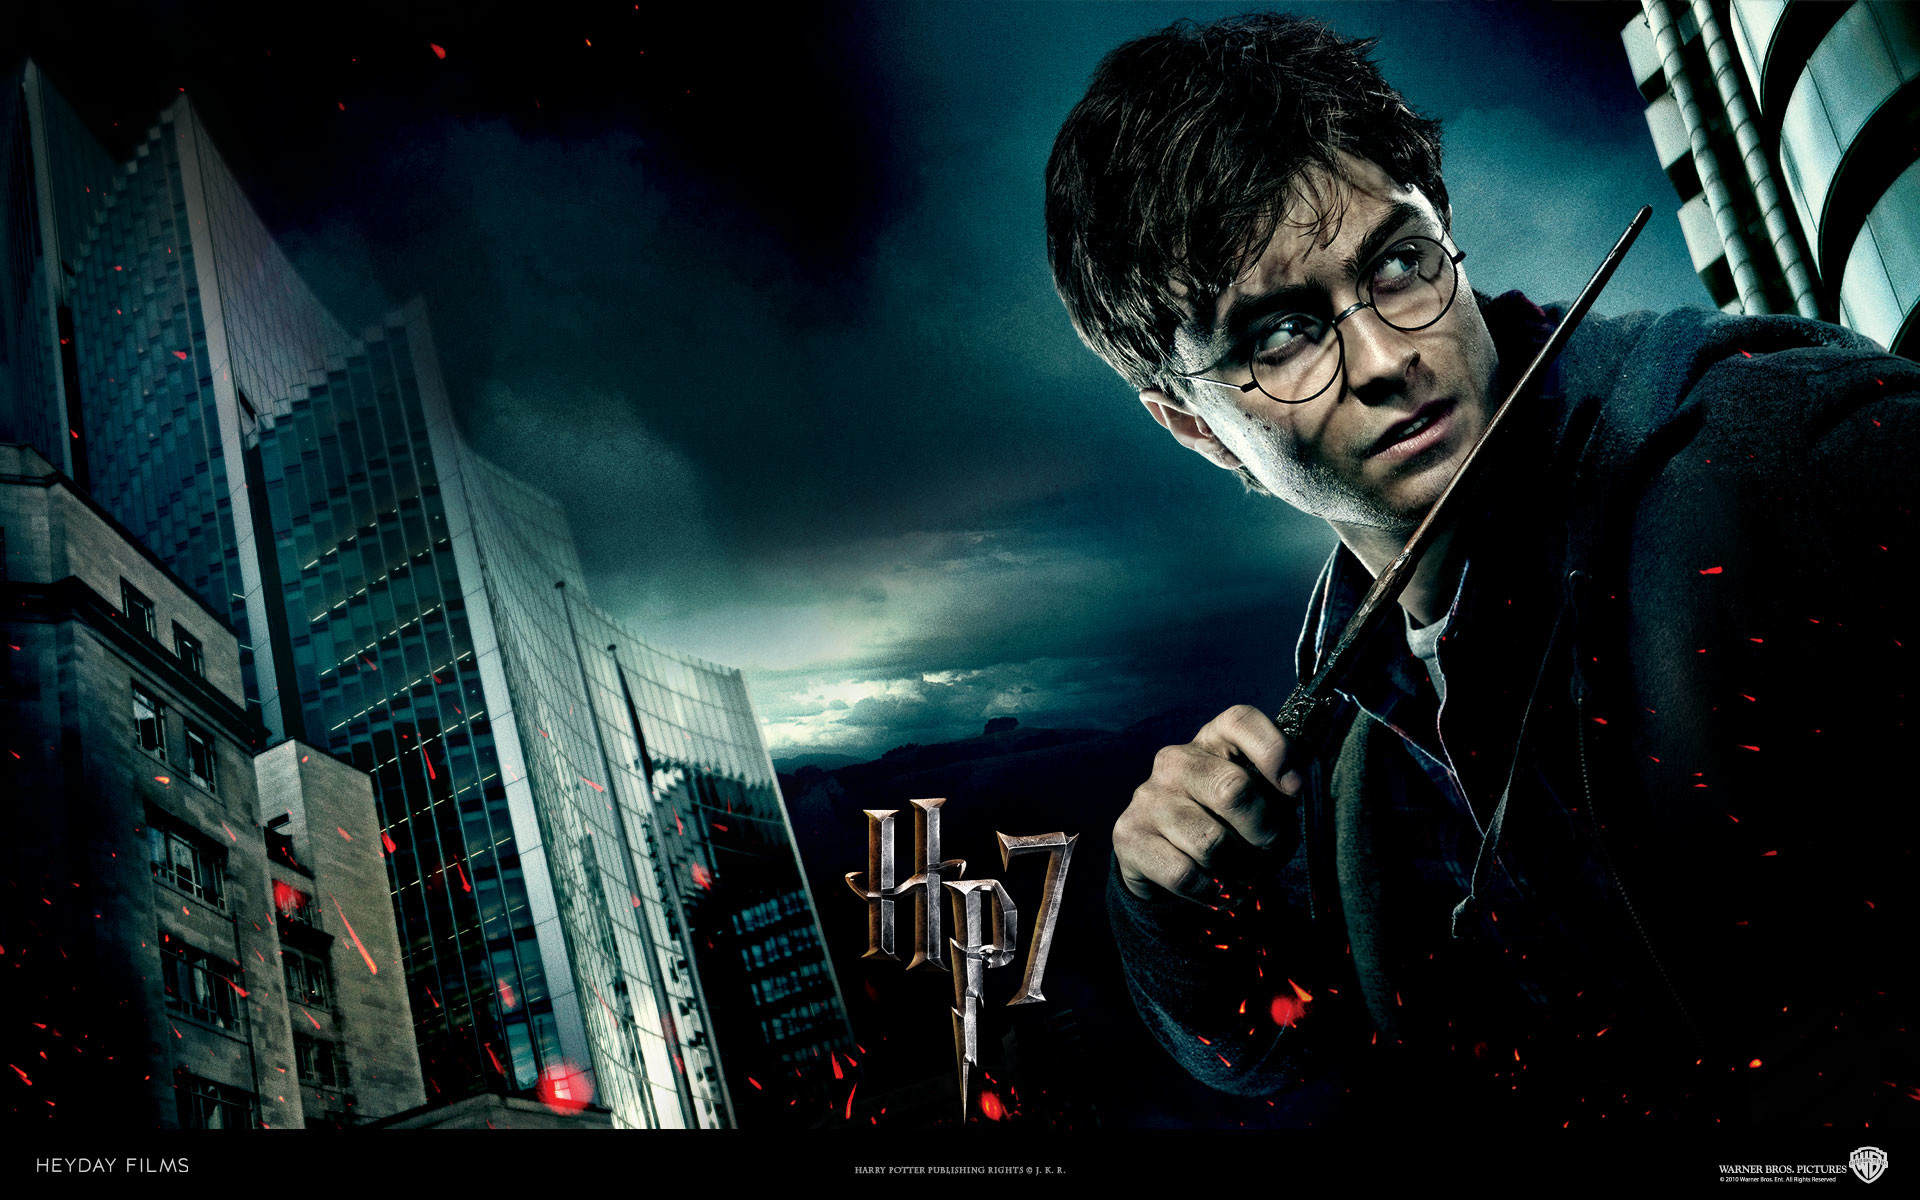 1920x1200 Harry Potter from Harry Potter and the Deathly Hallows movie wallpaper